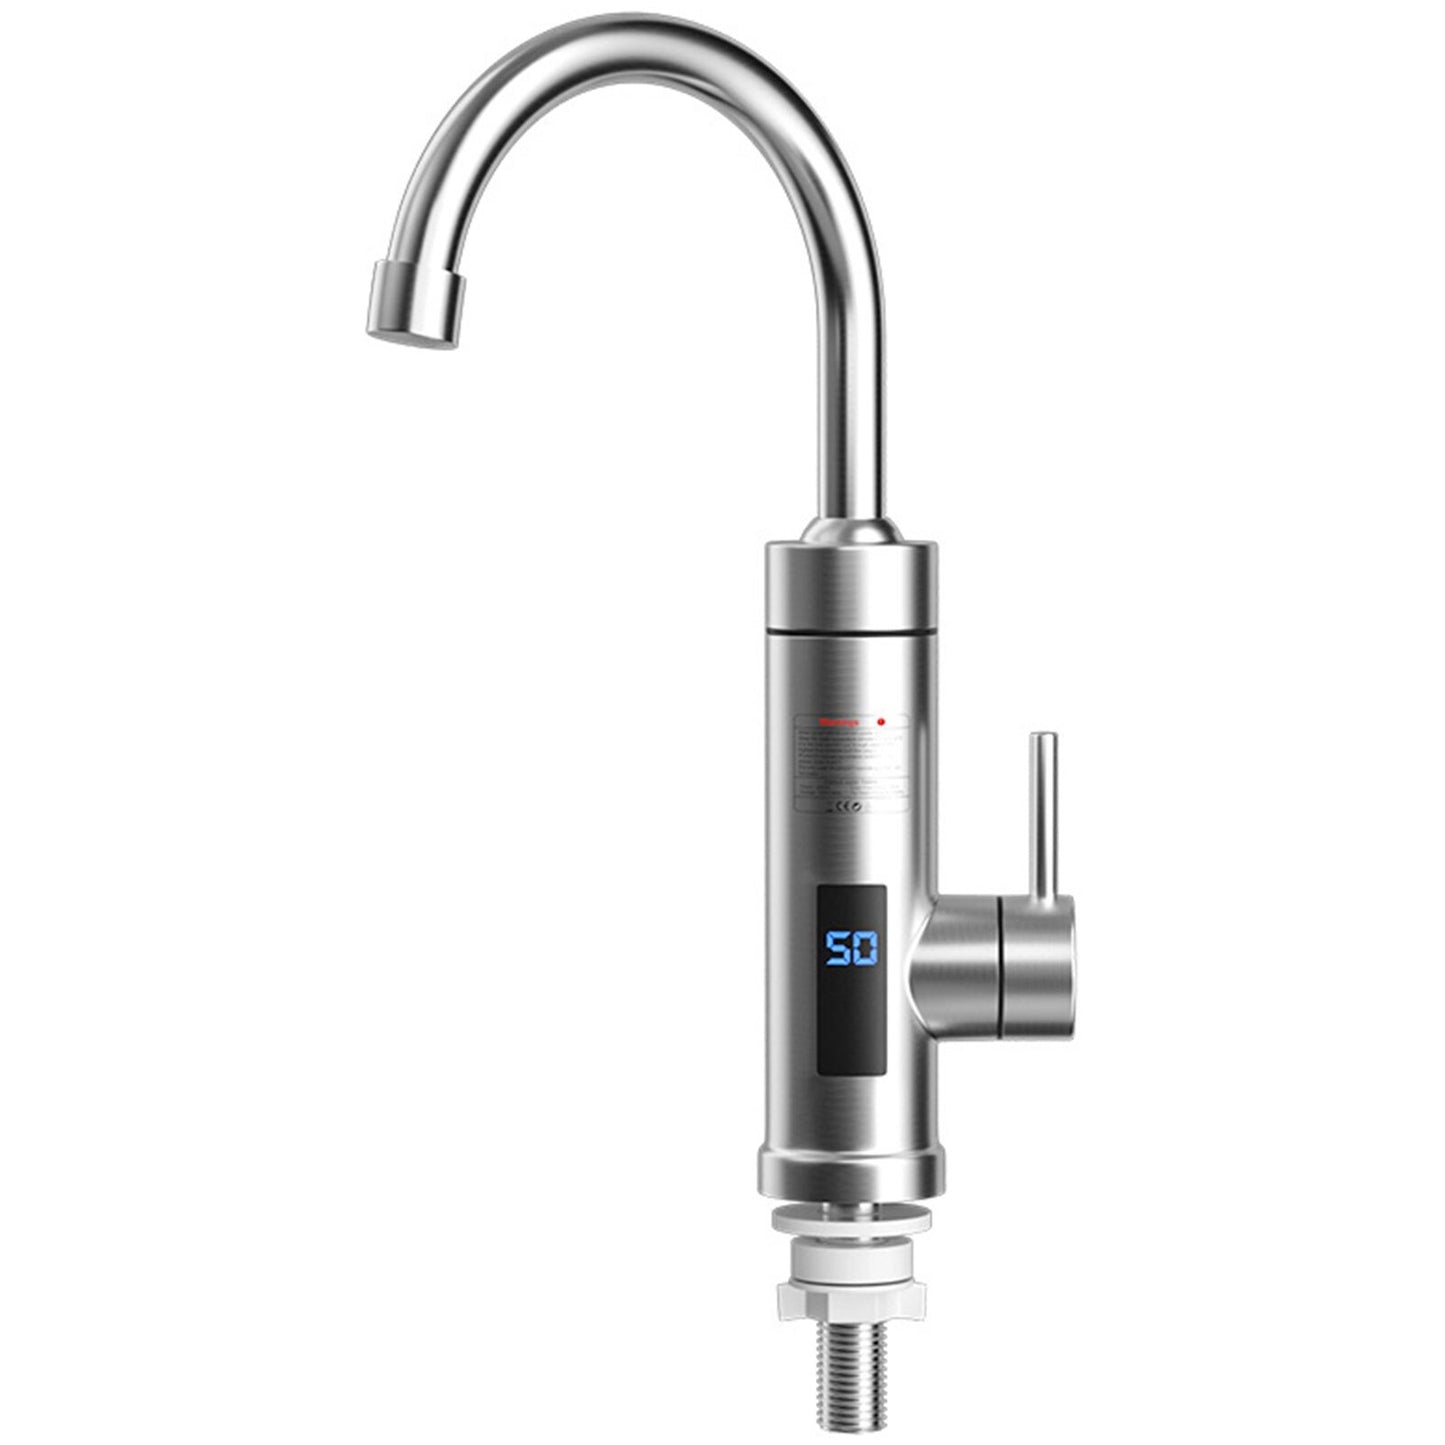 Instant Hot Water Faucet Water Faucet For Kitchen Sink Instant Hot And Cold Water Dispenser Faucet Faucet With Digital Display - WELQUEEN HOME DECOR